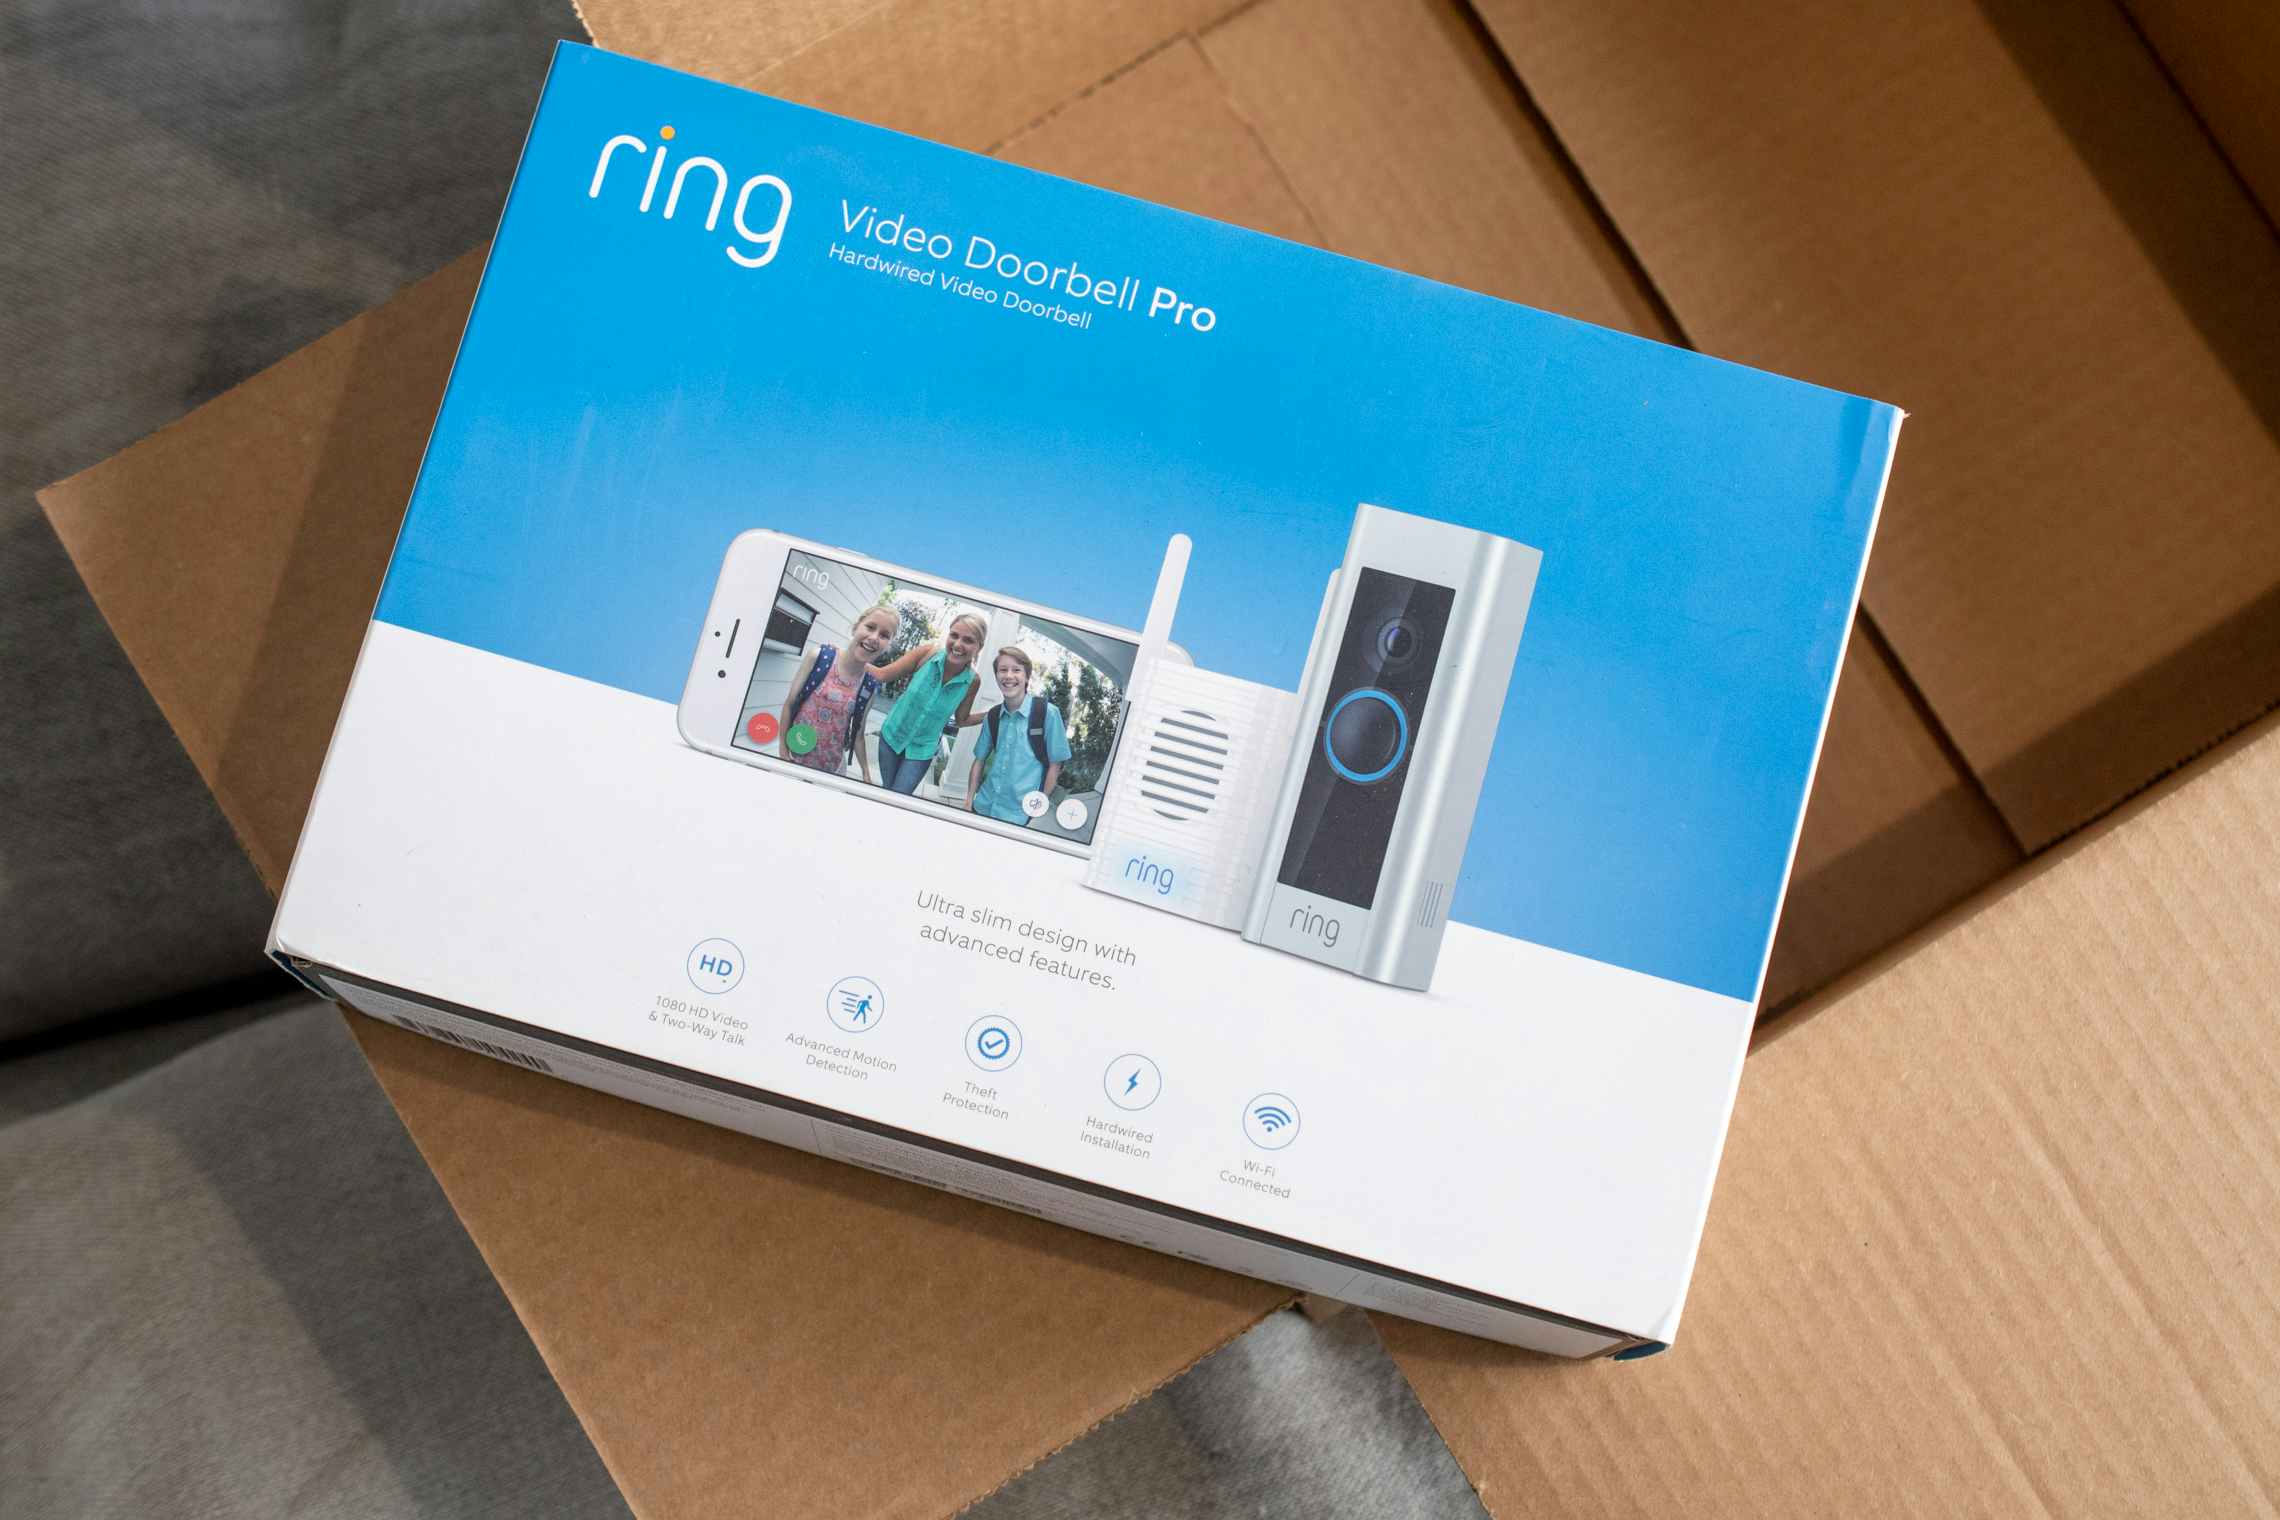 a ring video doorbell pro sitting ontop of an Amazon box